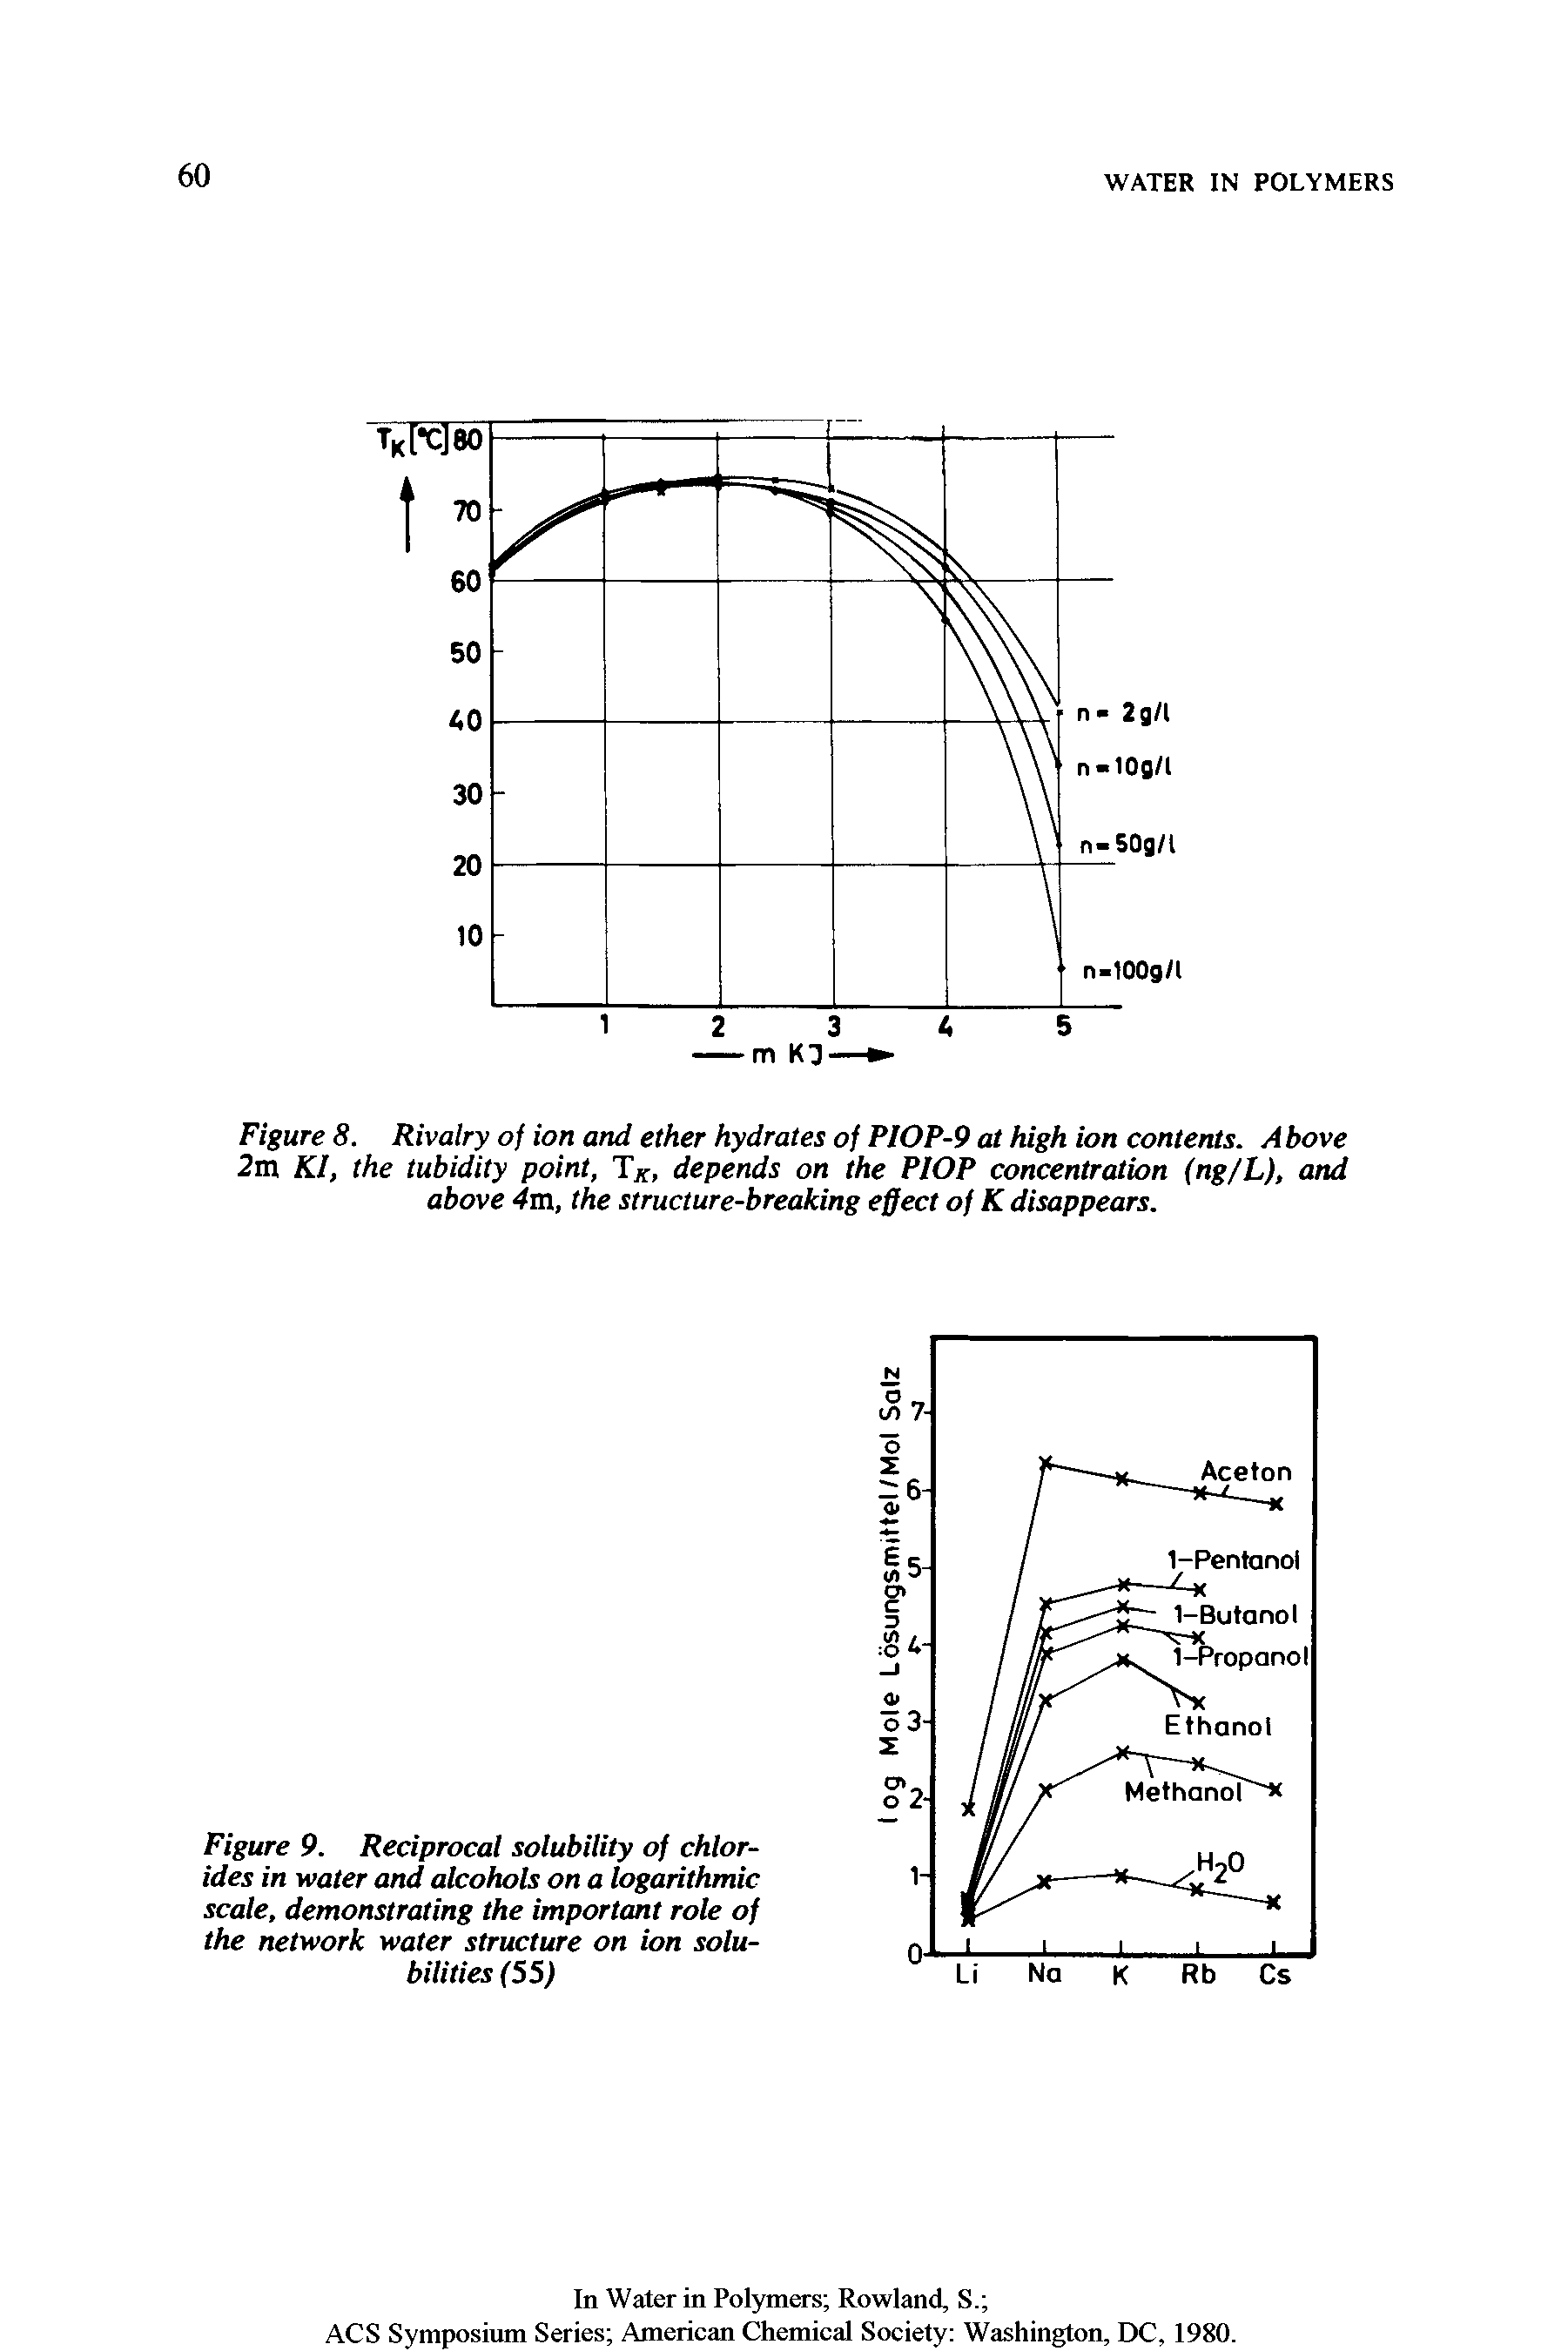 Figure 8. Rivalry of ion and ether hydrates of PlOP-9 at fugh ion contents. Above 2m Kl, the tubidity point, depends on the PIOP concentration (ng/L), arut above 4m, the structure-breaking effect of K disappears.